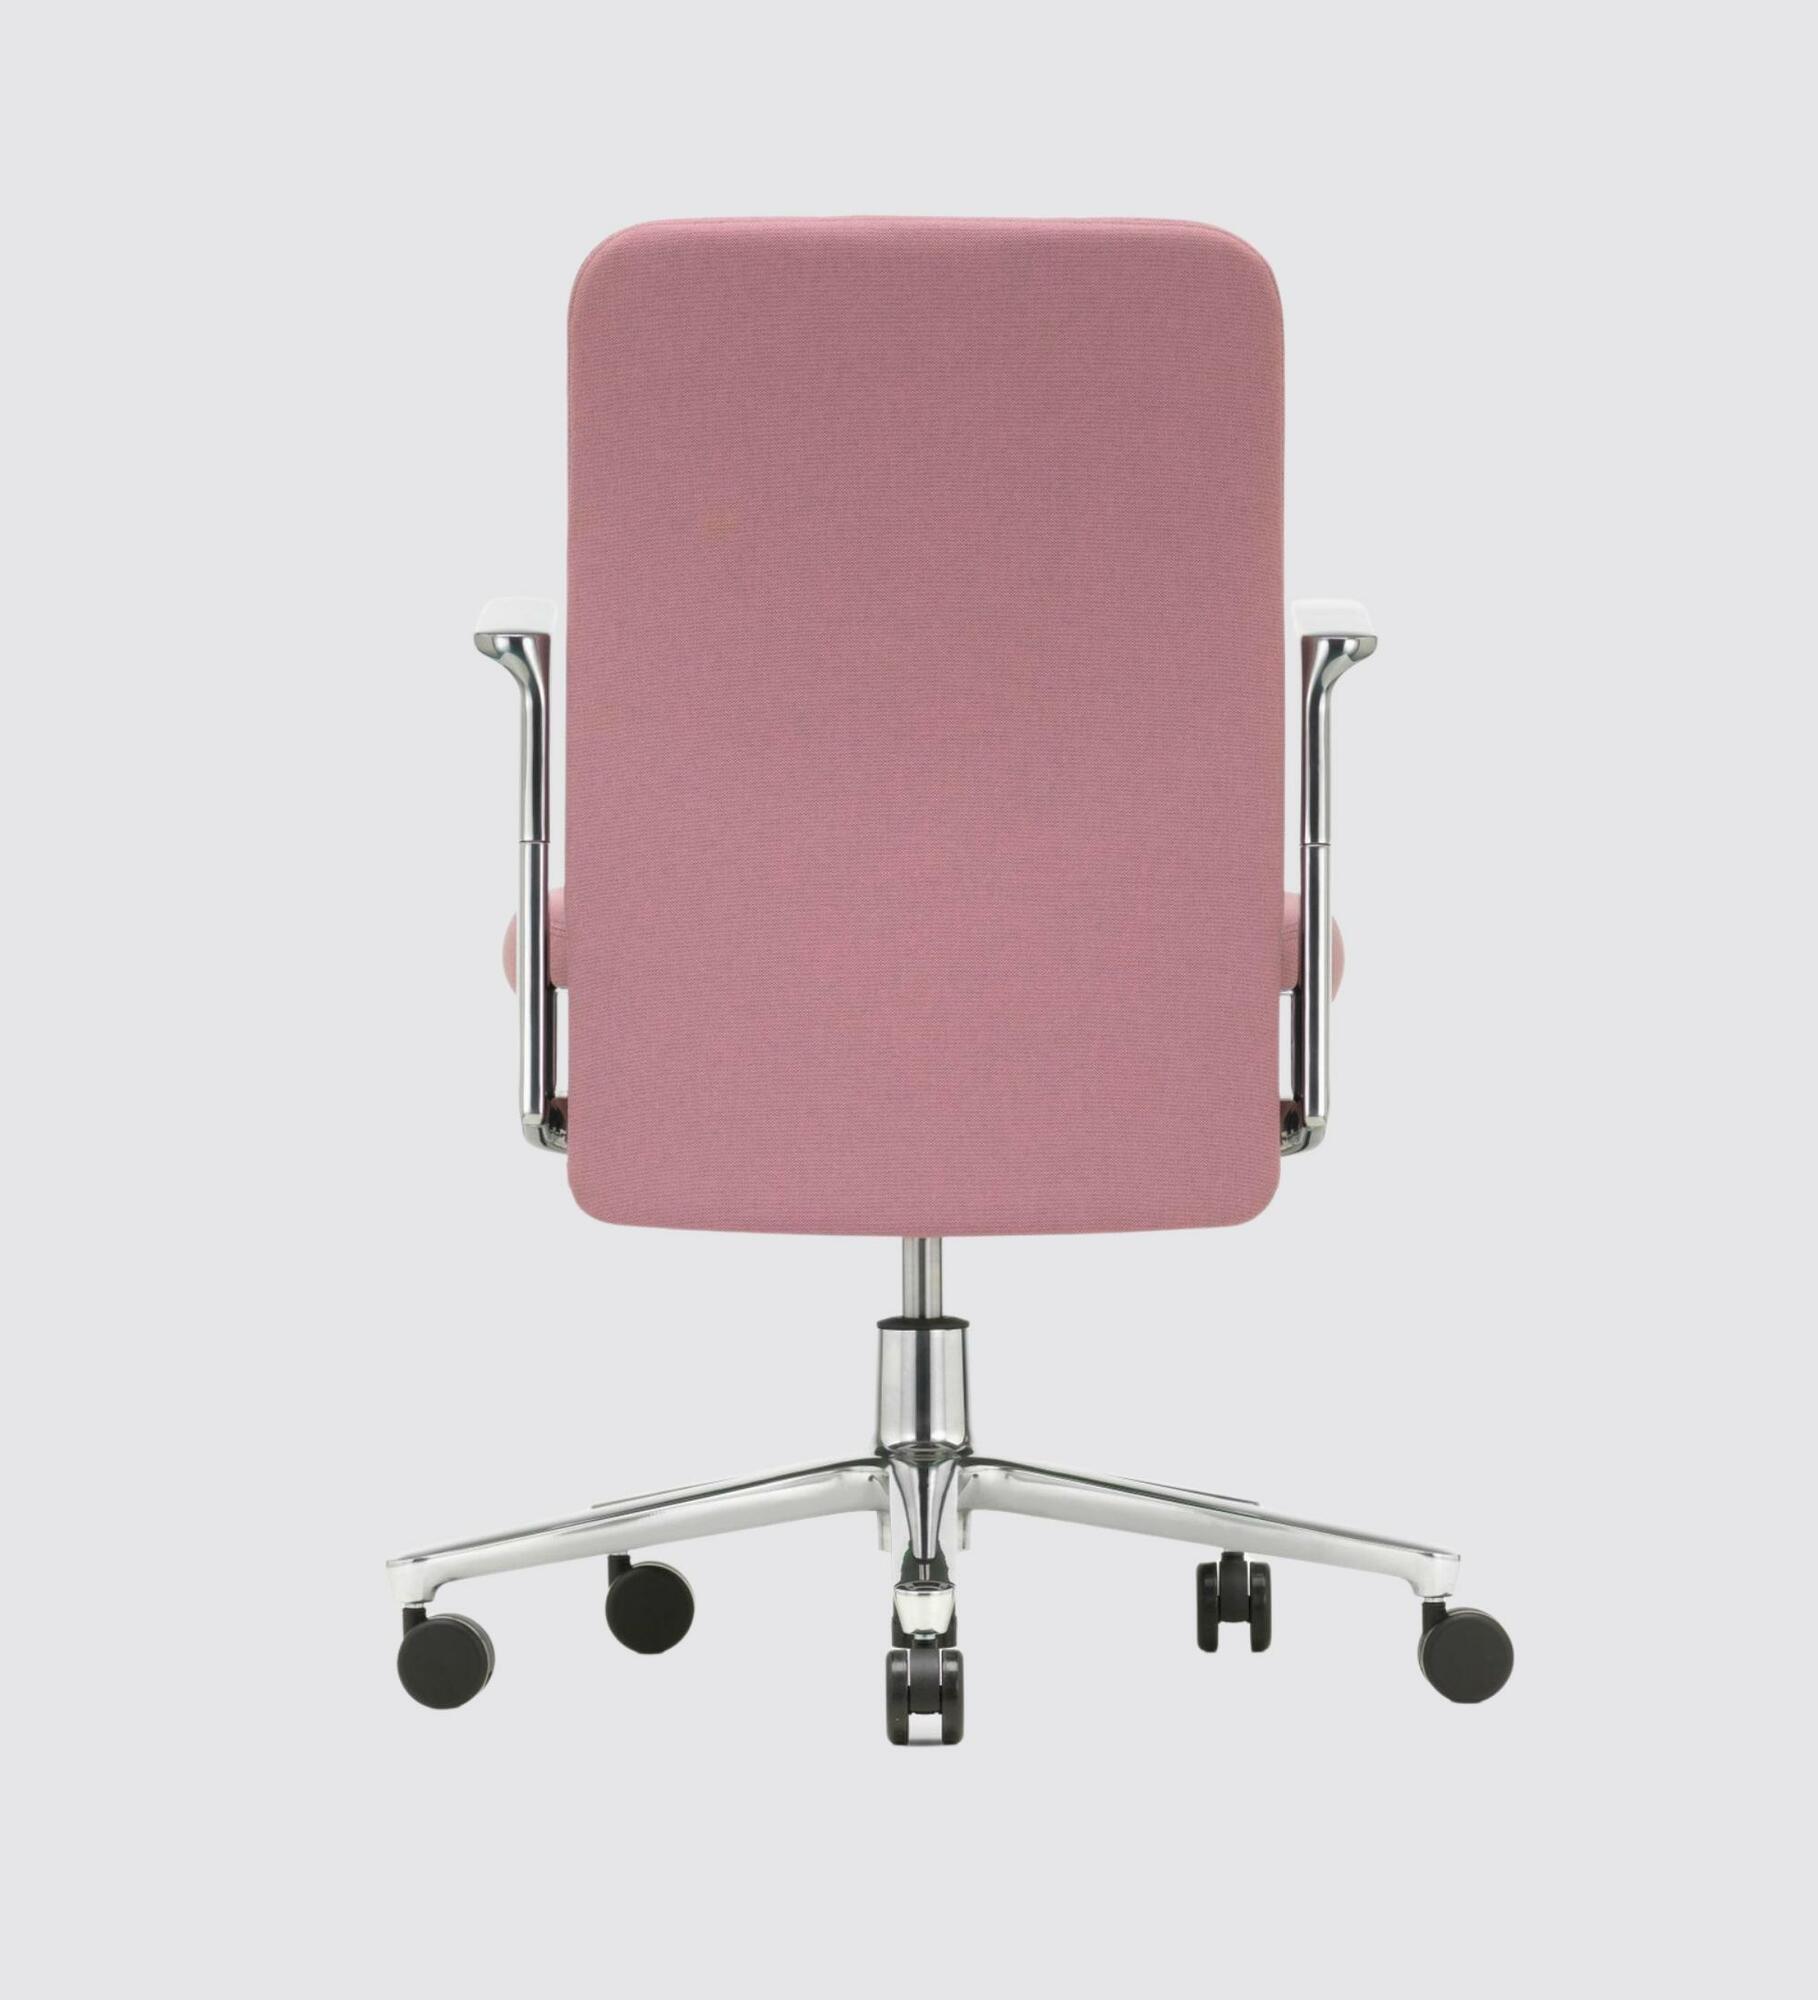 Vitra Pacific Chair Plano Pink 2